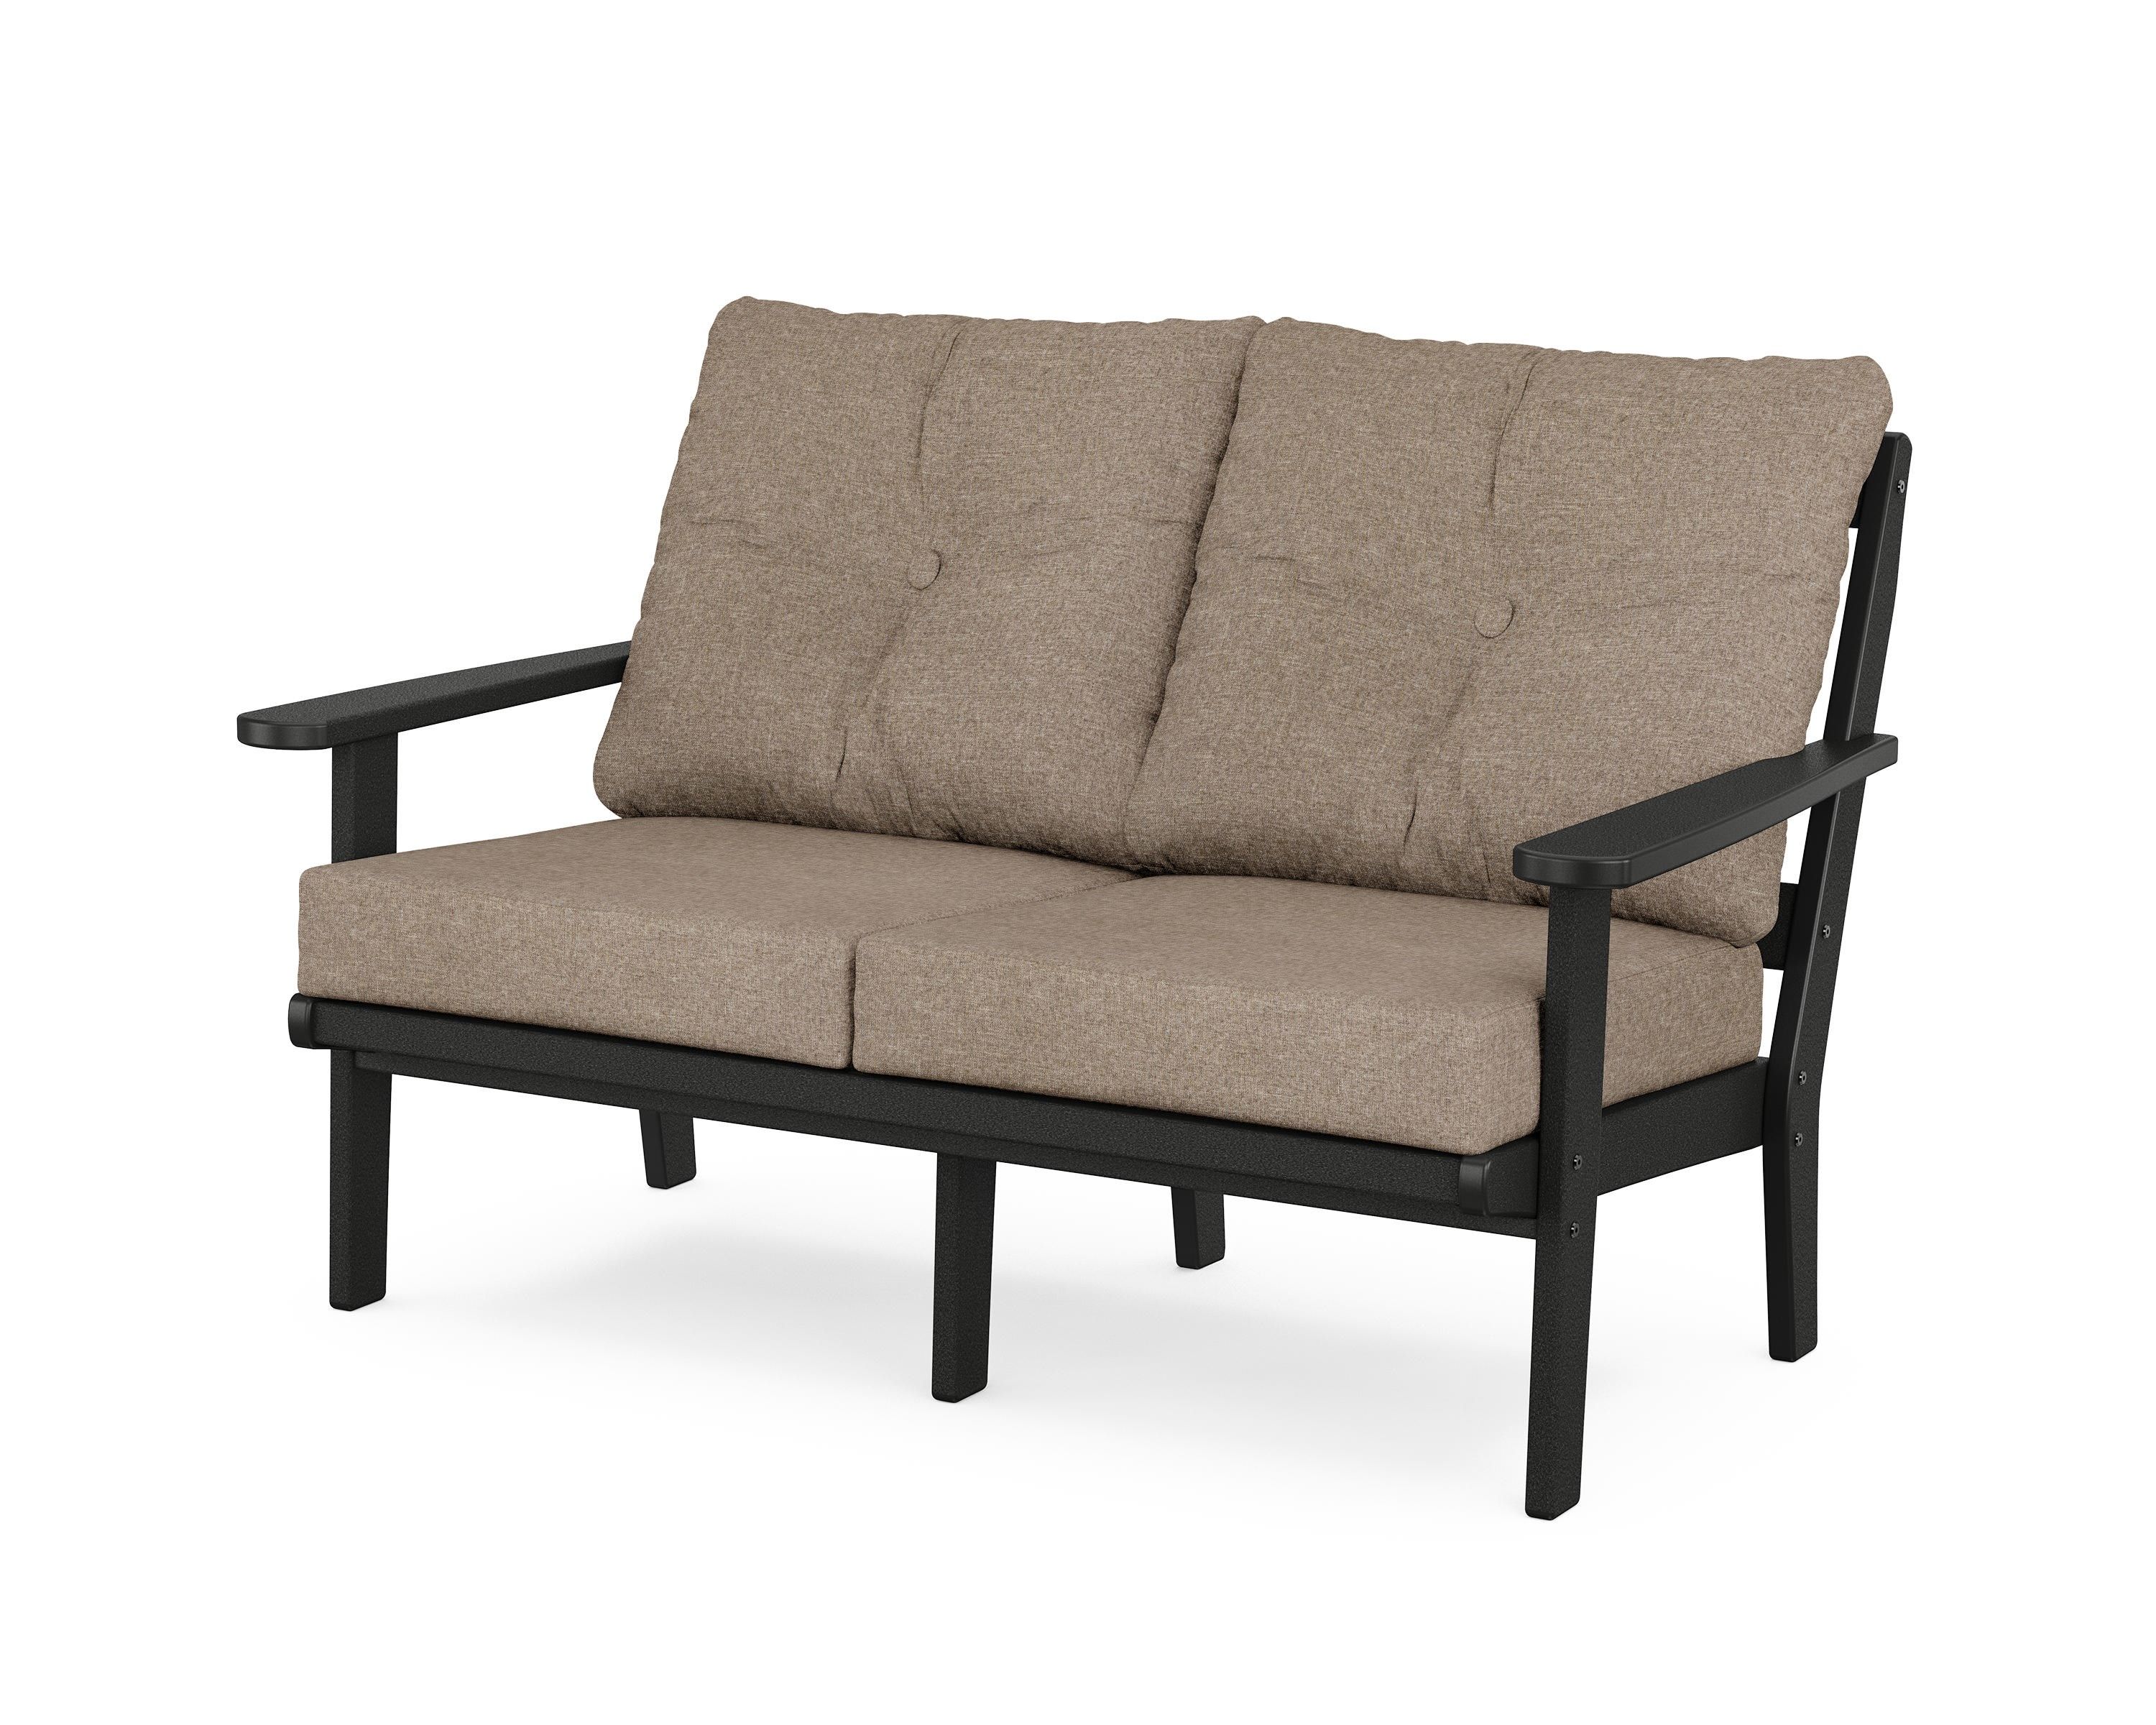 Trex Outdoor Furniture Cape Cod Deep Seating Loveseat